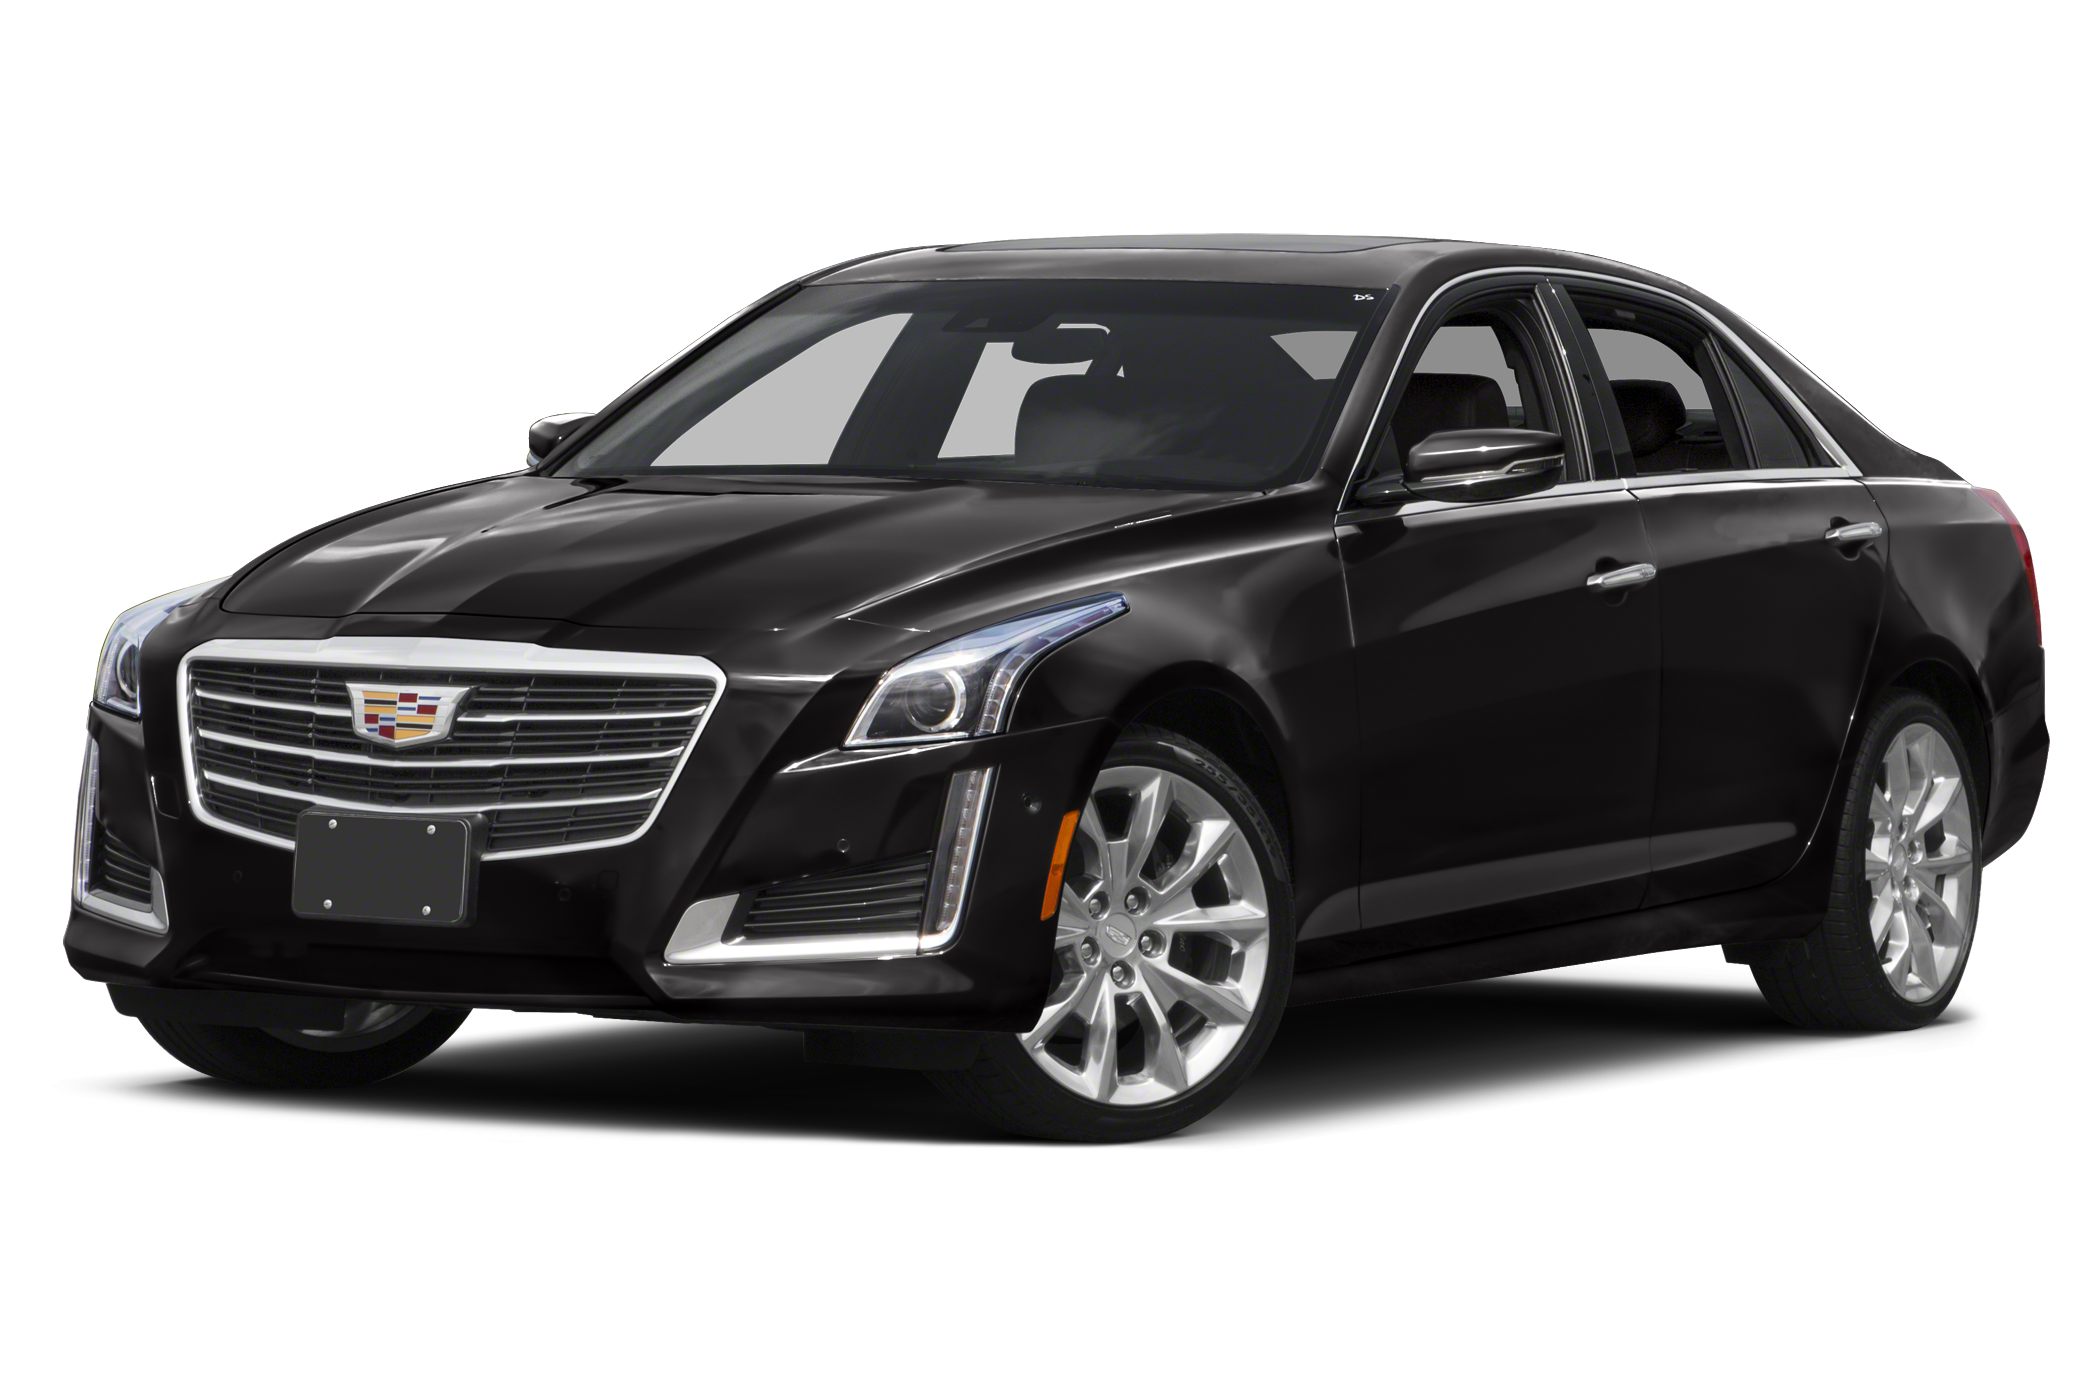 HQ Cadillac CTS Wallpapers | File 188.25Kb